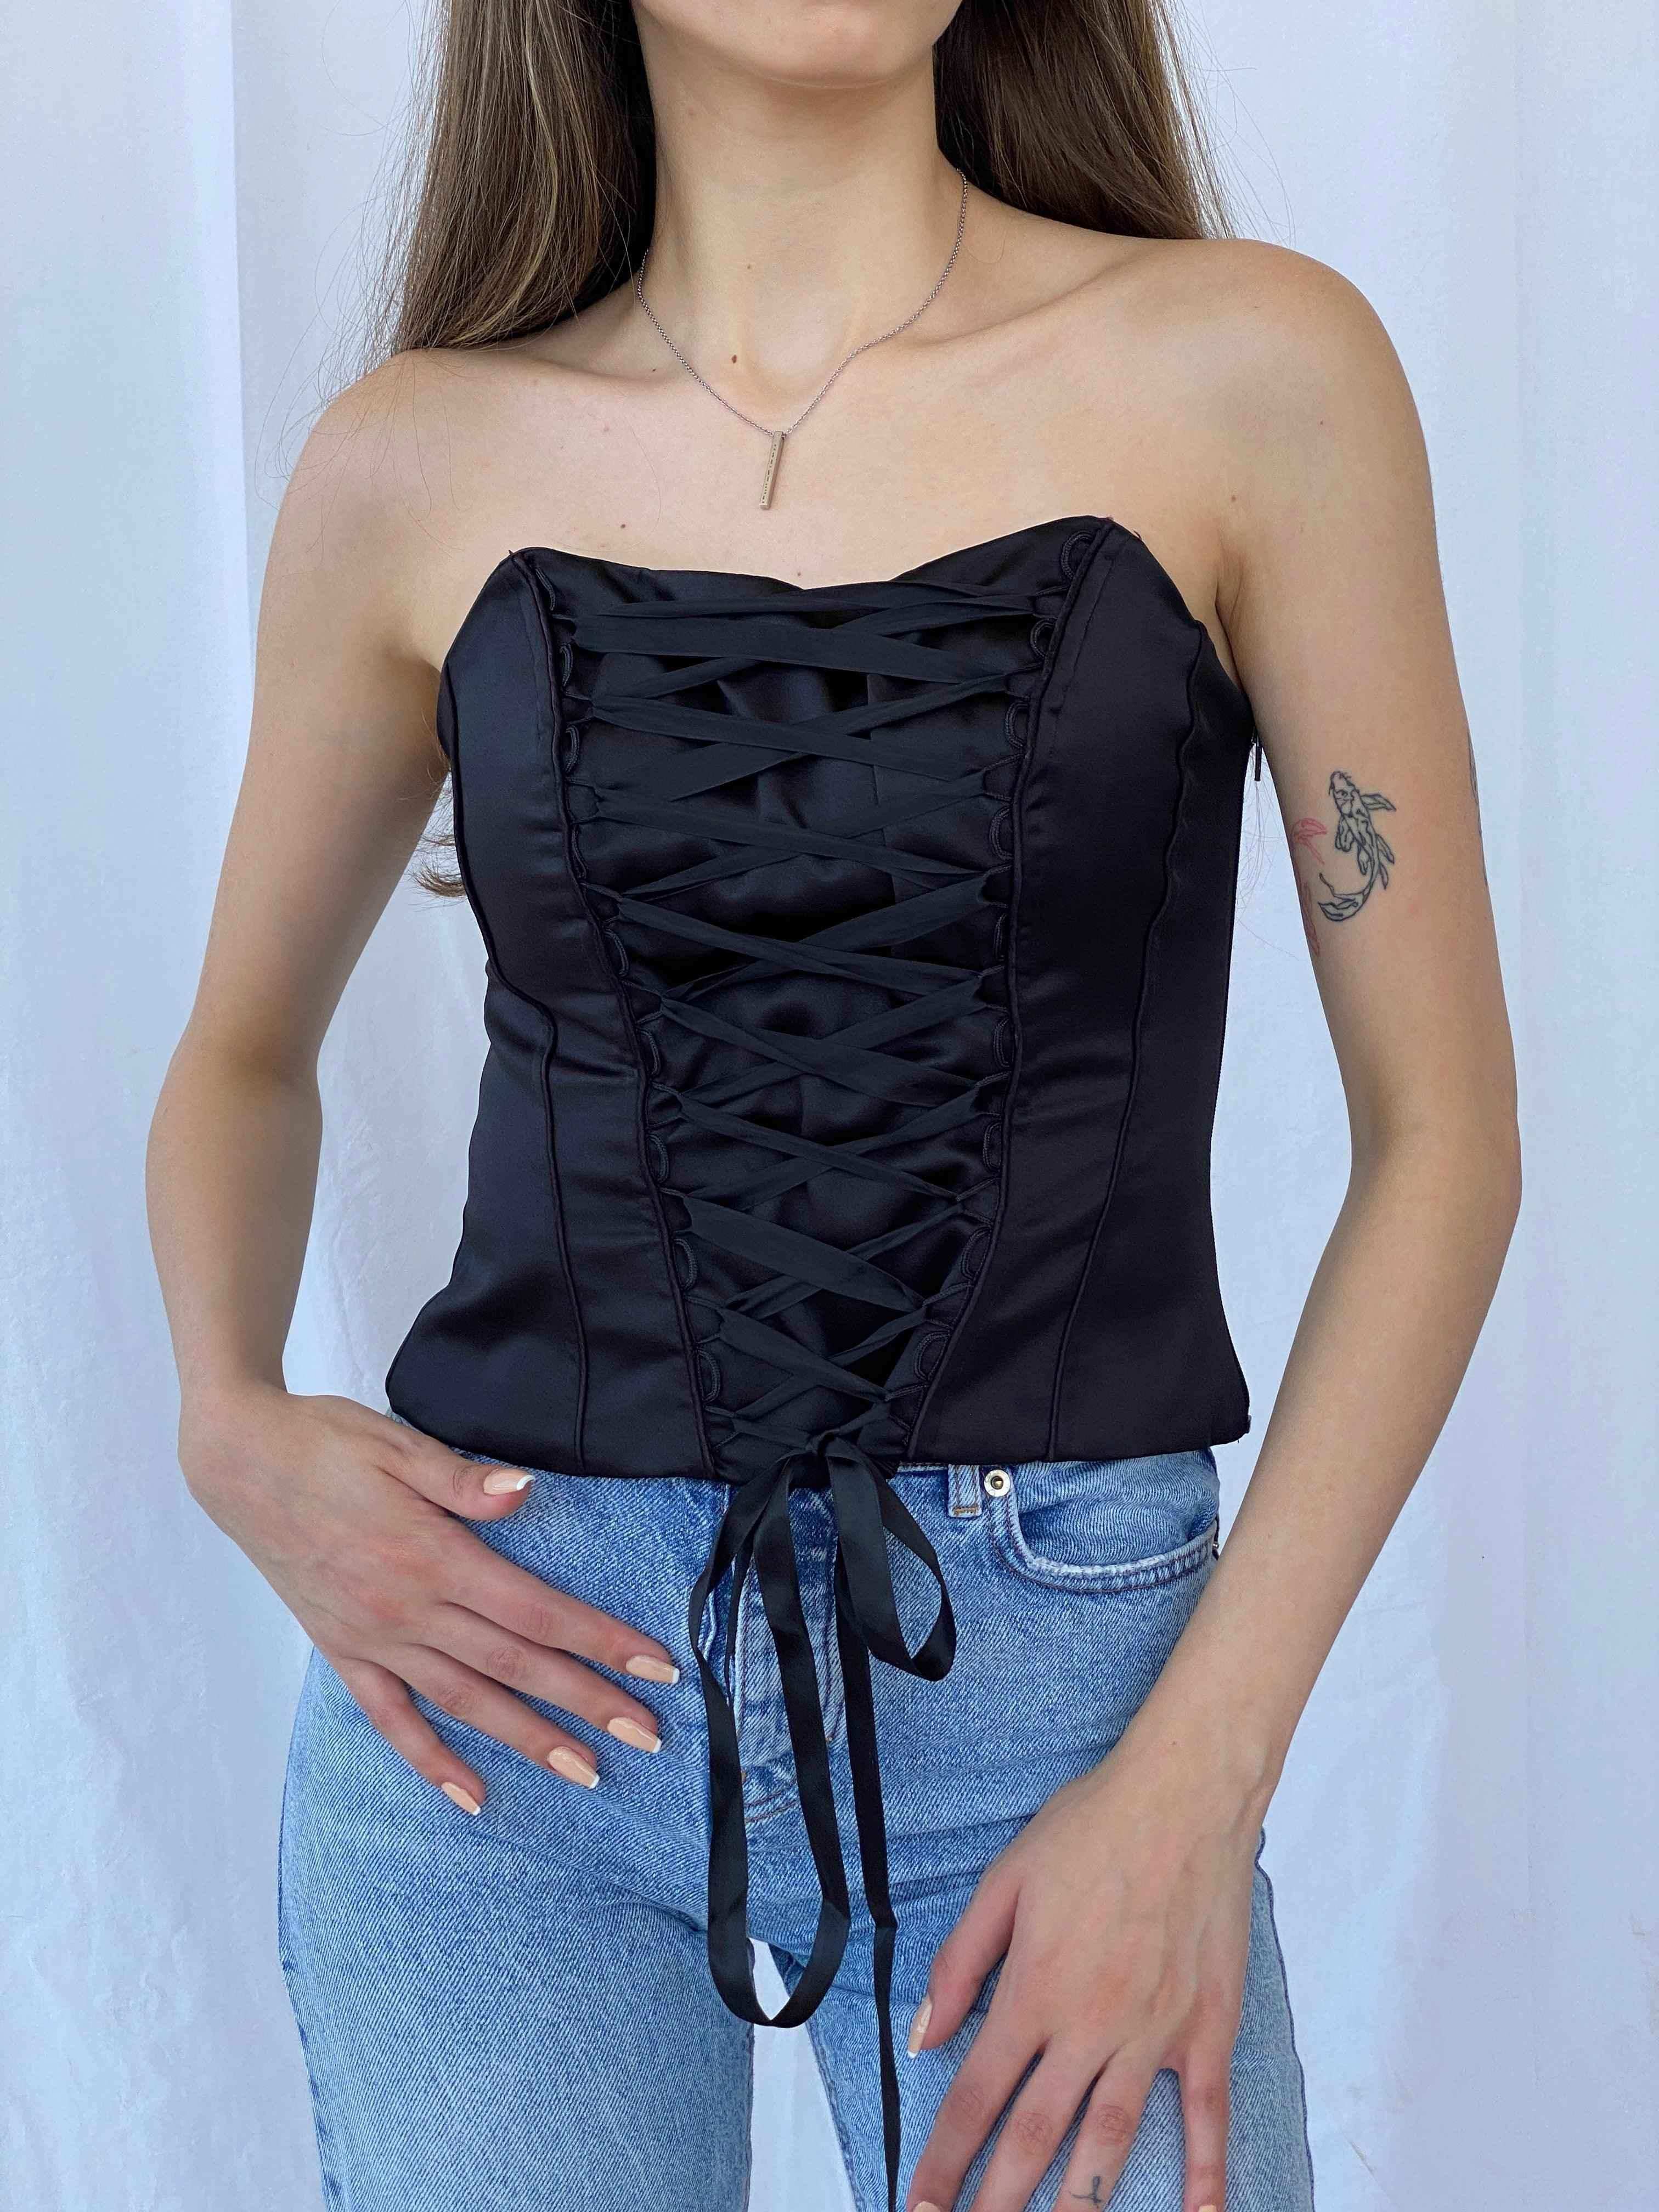 Vintage Y2K Your 6th Sense Boned Corset- Fits Size XSmall/Small